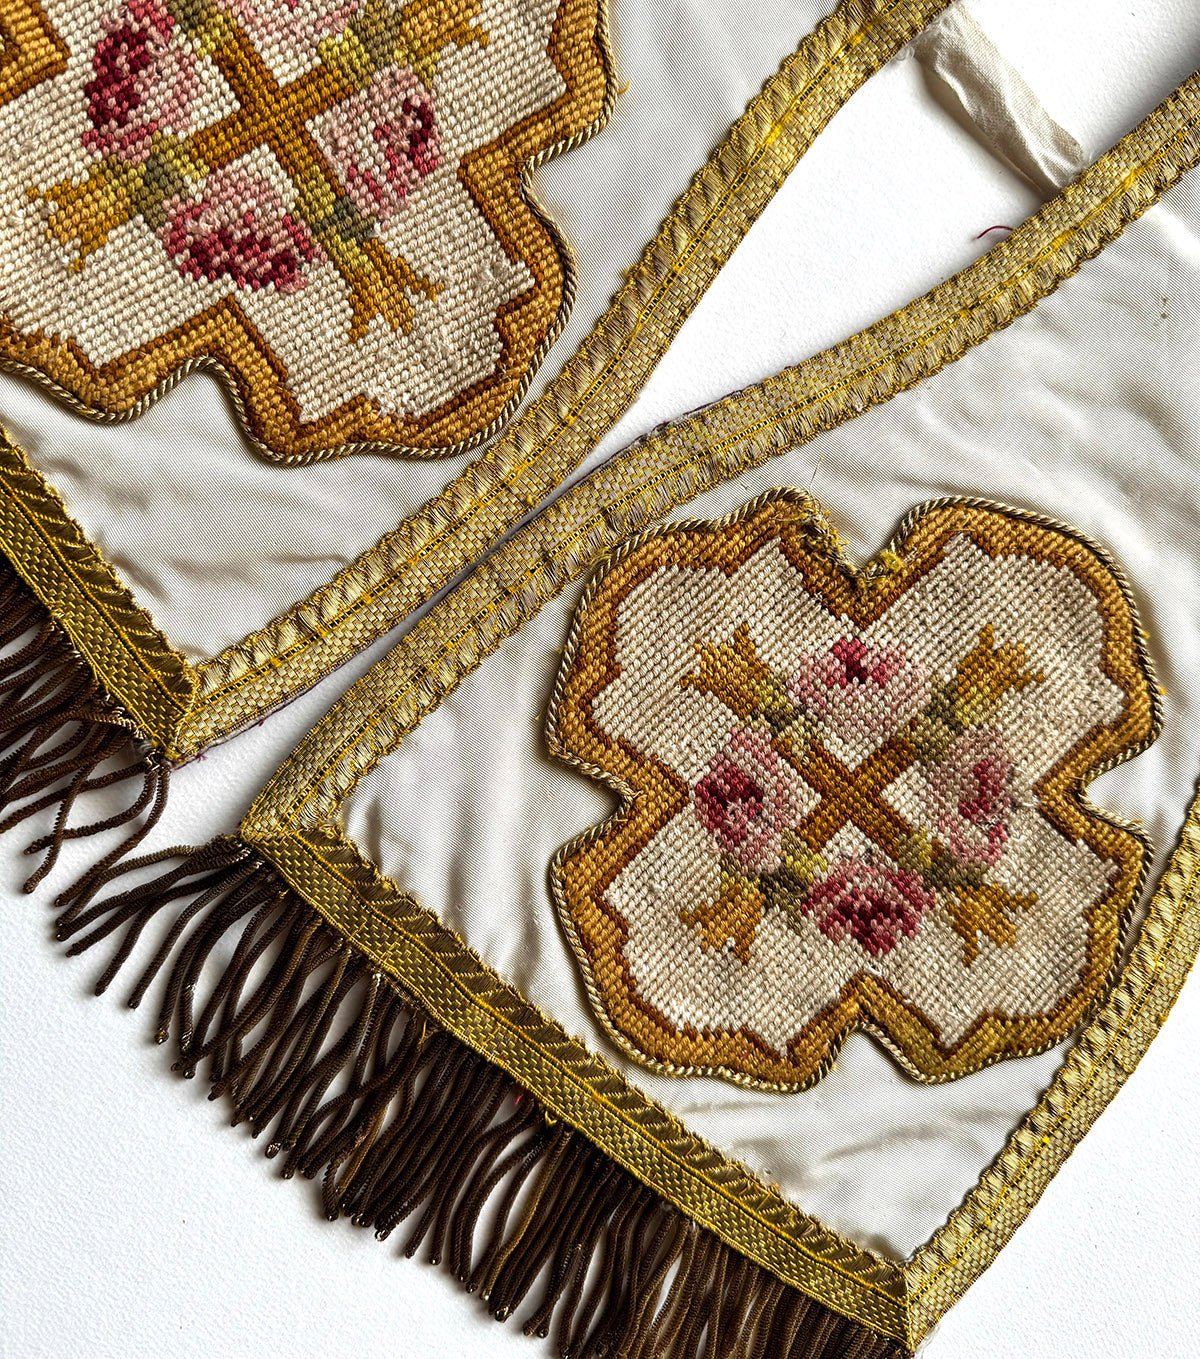 Antique French Made Catholic Silk Embroidery on Silk Ecclesiastical White Stole with Gold Metallic Fringe